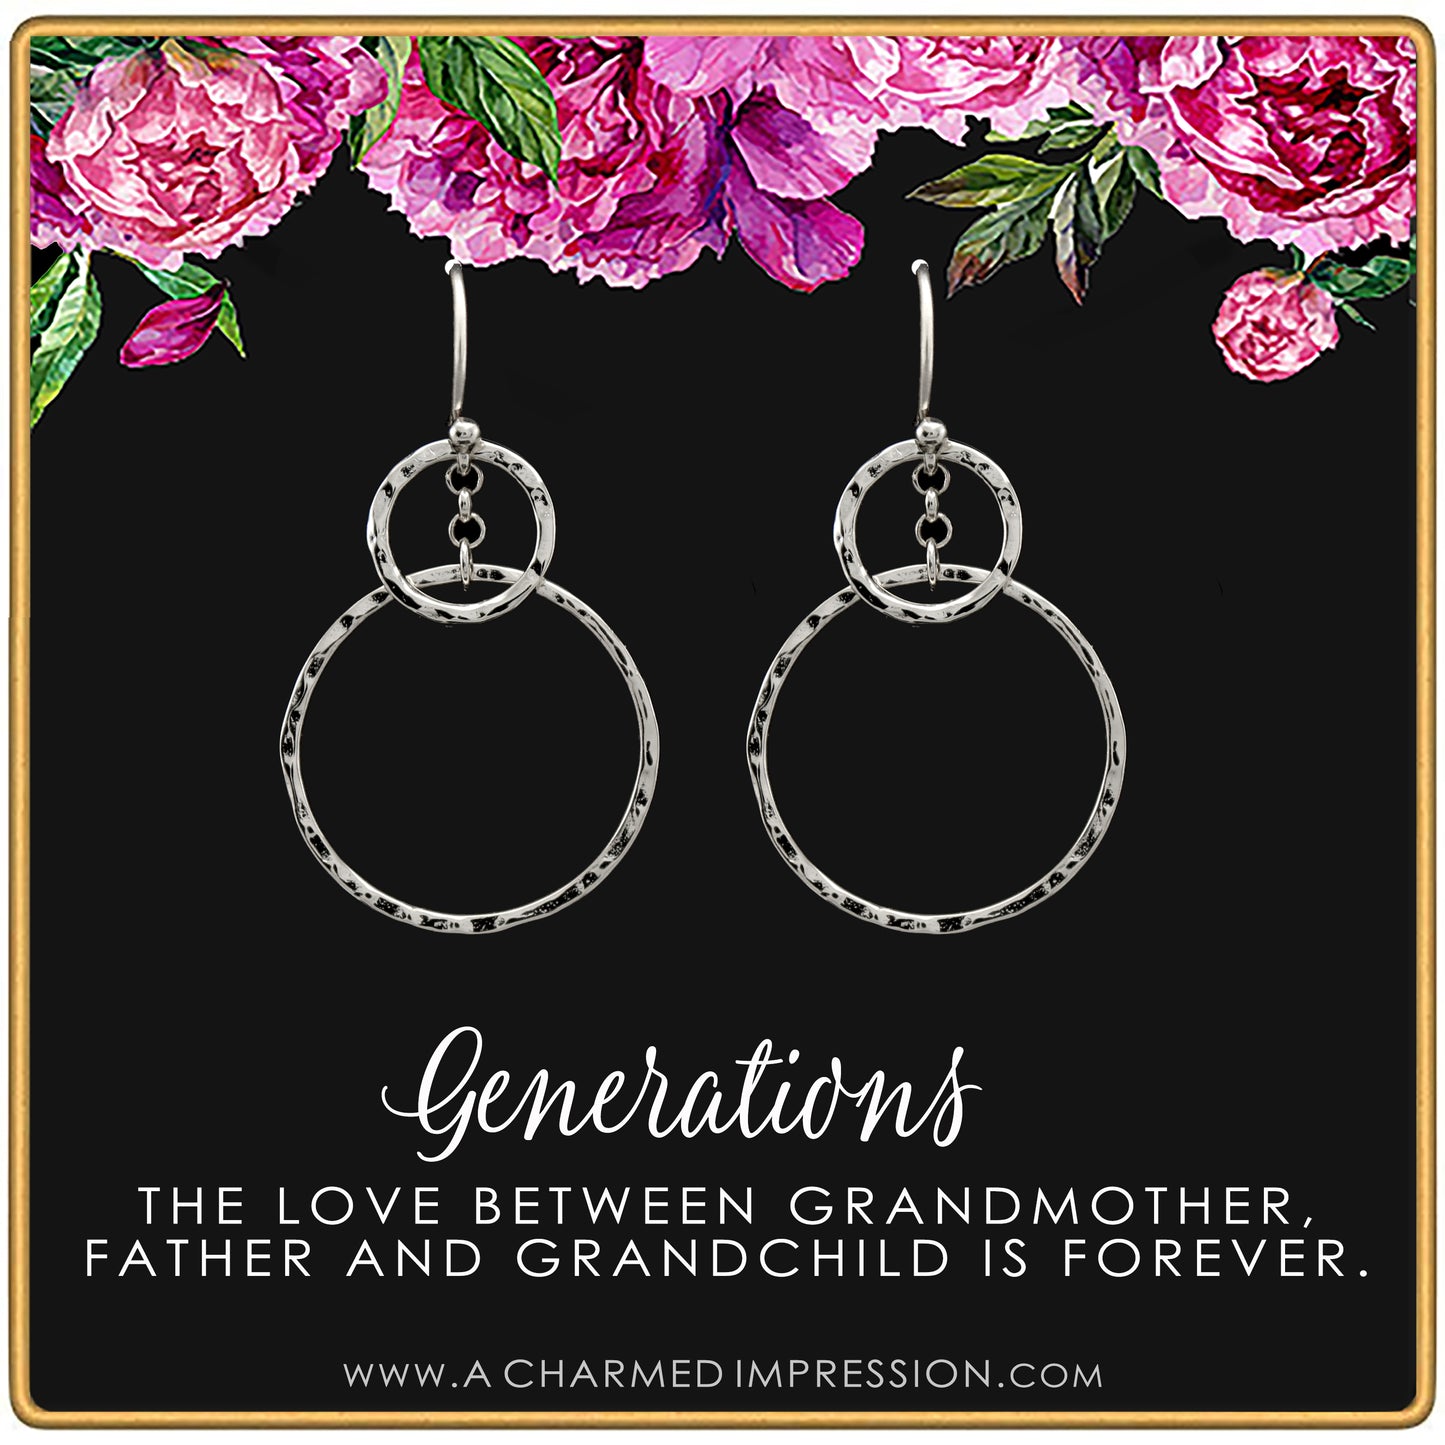 Three Generations Earrings • Best Grandma Gifts • Grandmother, Father, Grandchild Gifts for Mothers Day Jewelry Birthday • Hammered Rings Earrings